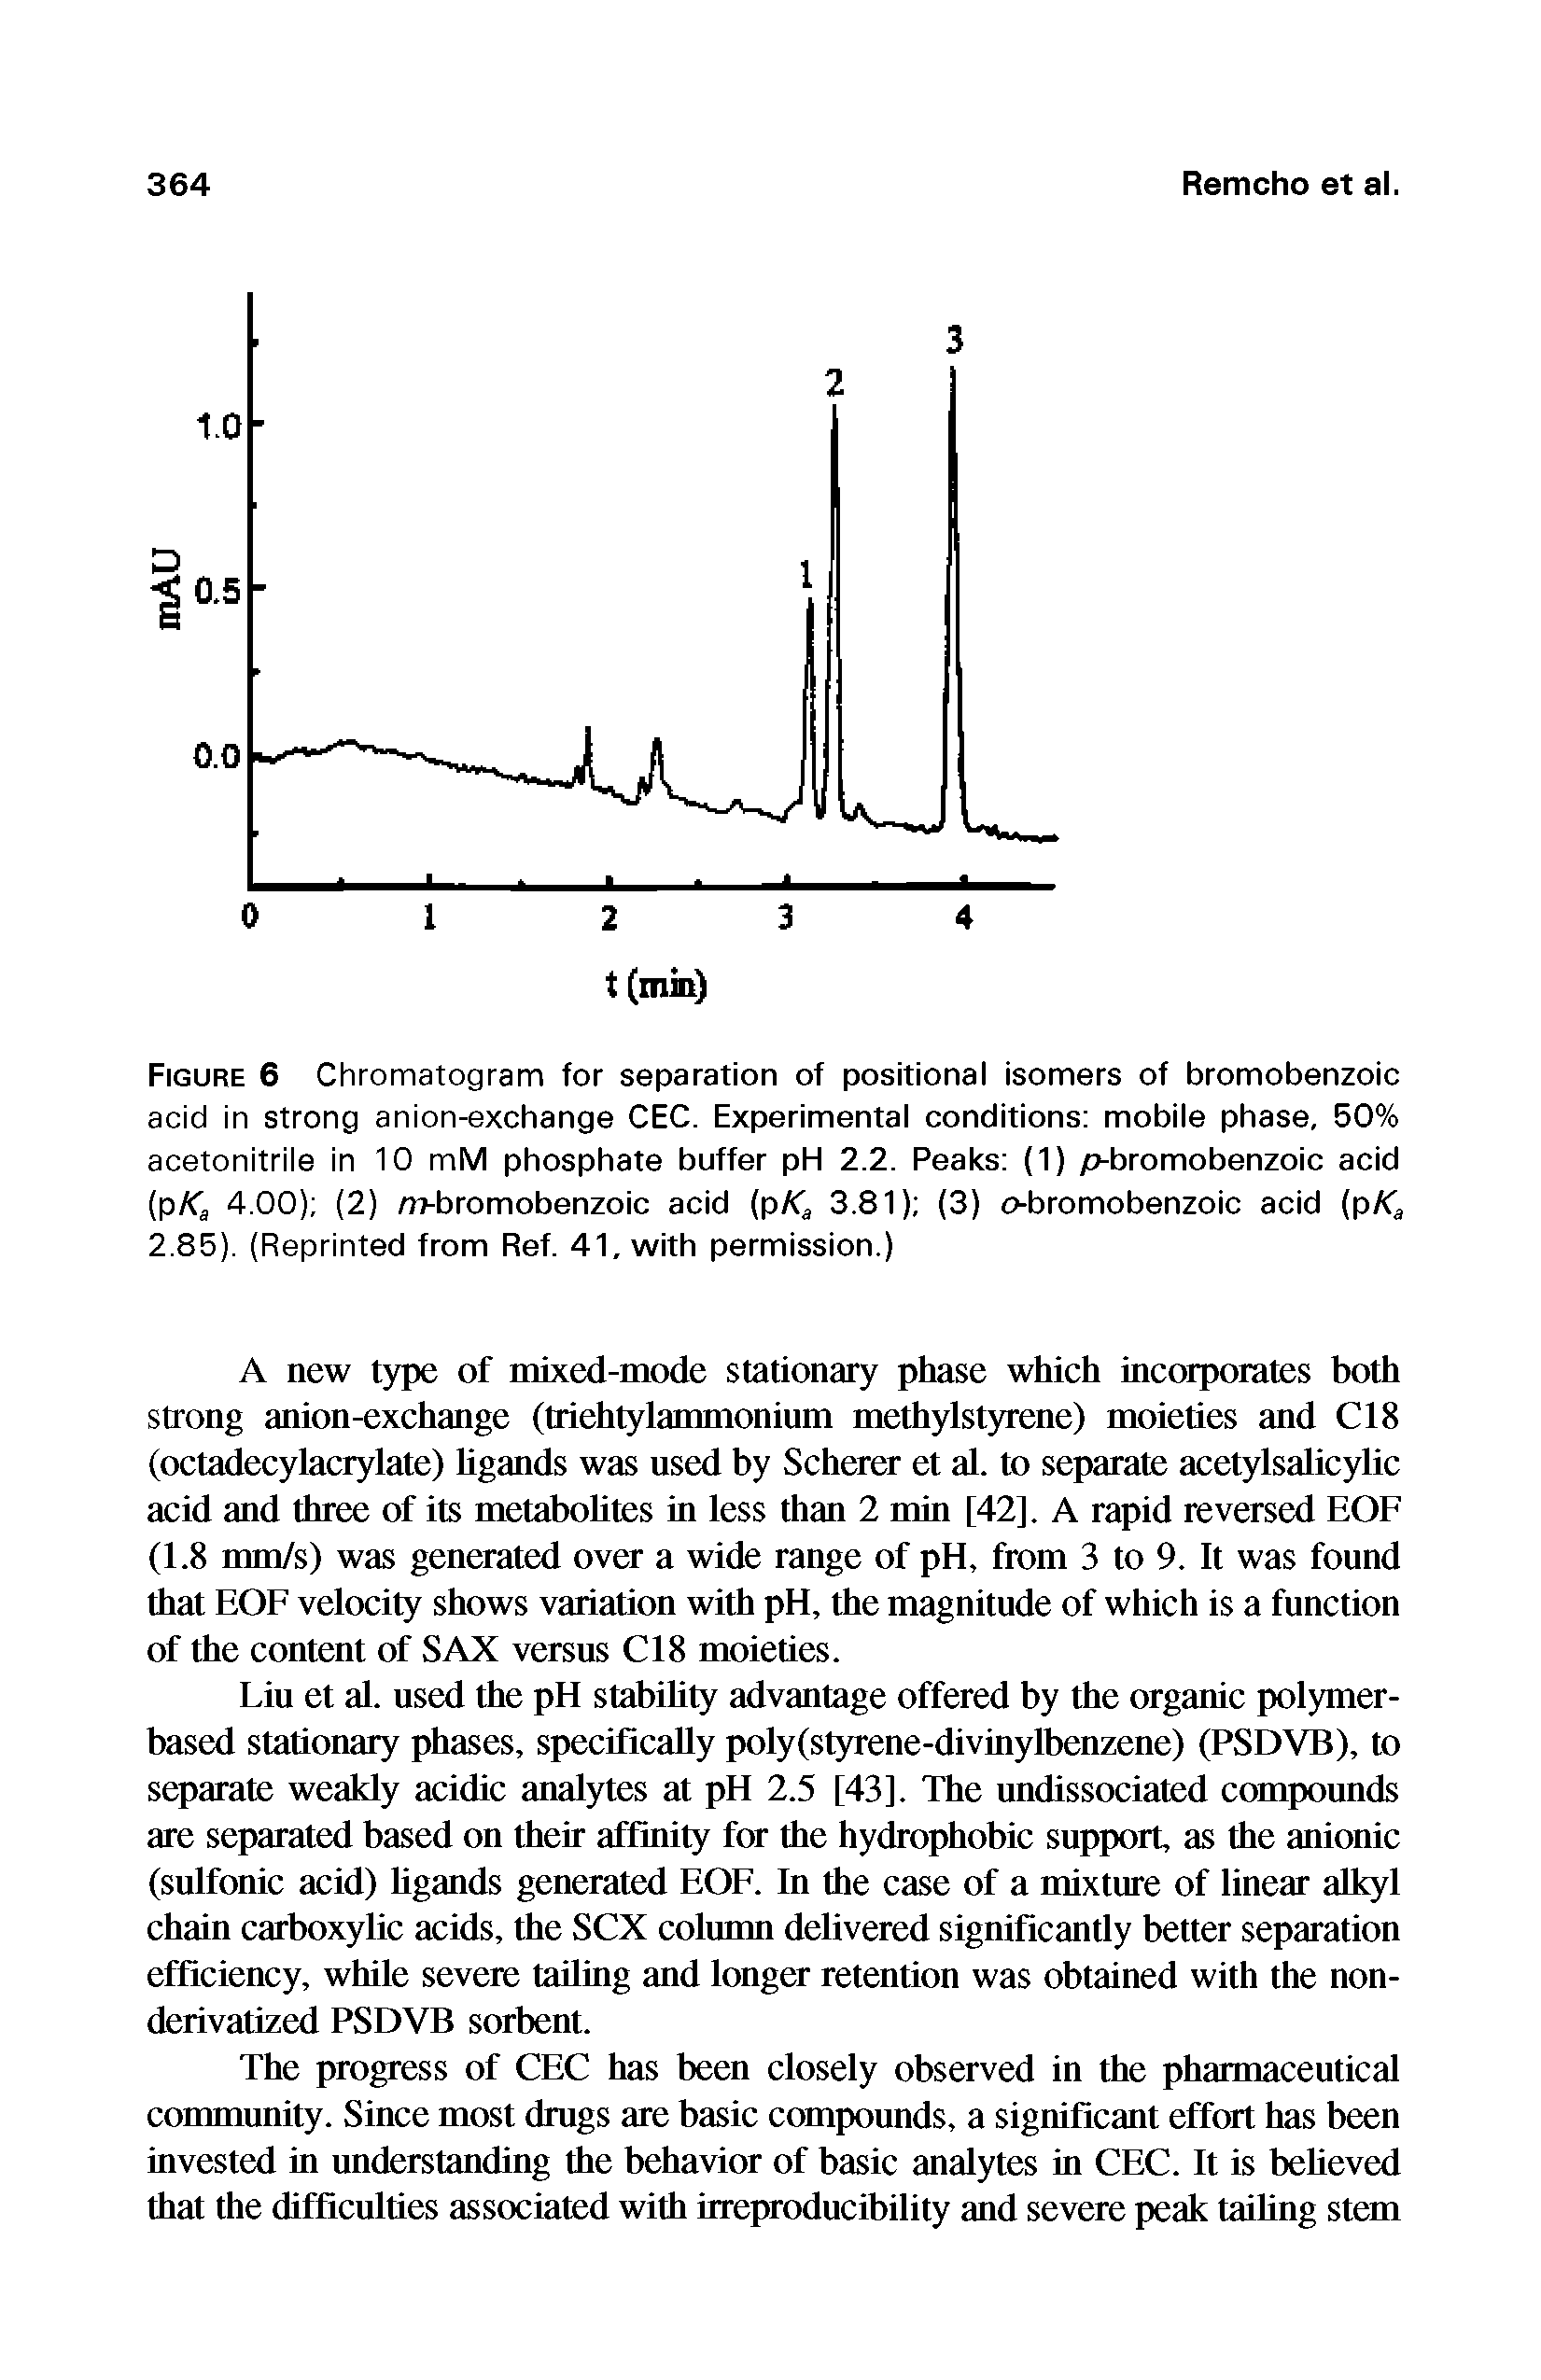 Figure 6 Chromatogram for separation of positional isomers of bromobenzoic acid in strong anion-exchange CEC. Experimental conditions mobile phase, 50% acetonitrile in 10 mM phosphate buffer pH 2.2. Peaks (1) p-bromobenzoic acid (pKa 4.00) (2) m-bromobenzoic acid (pKa 3.81) (3) o-bromobenzoic acid (pKa 2.85). (Reprinted from Ref. 41, with permission.)...